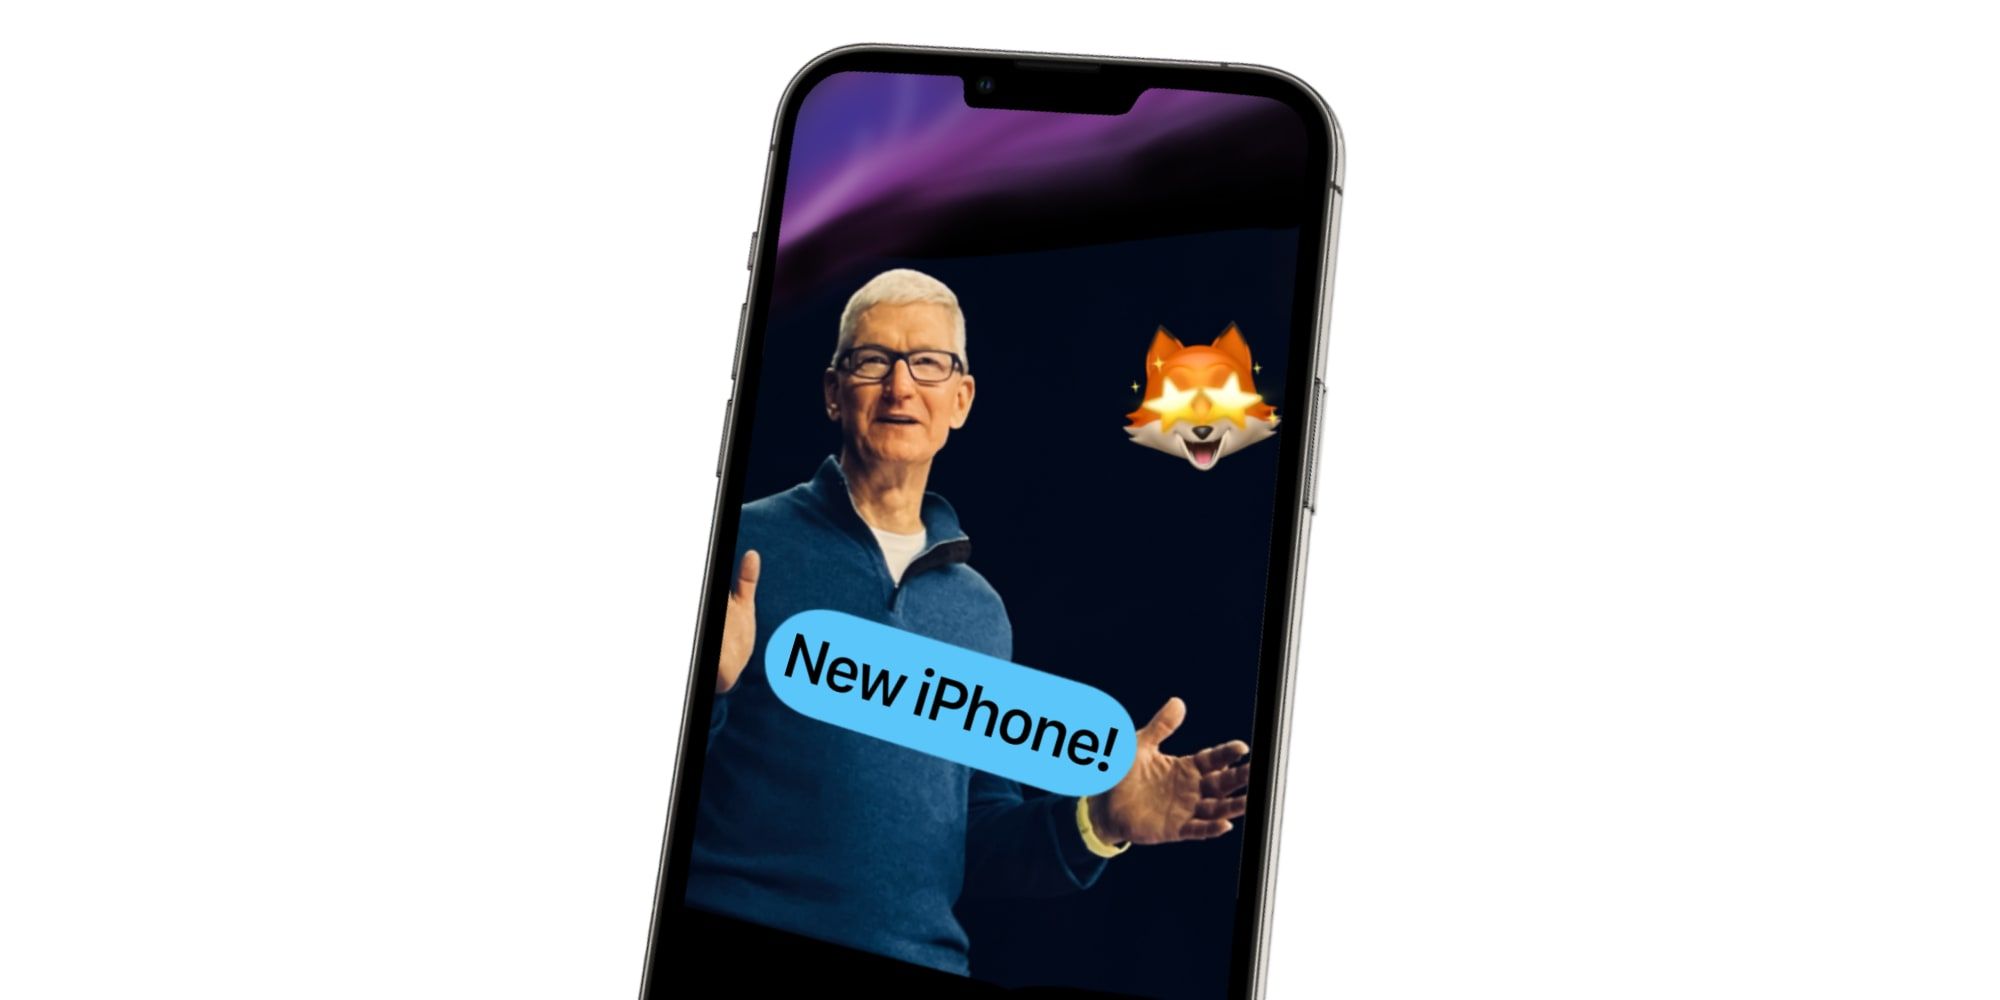 Apple iPhone 13 Tim Cook iMessage Filters Effects Memoji Text New iPhone